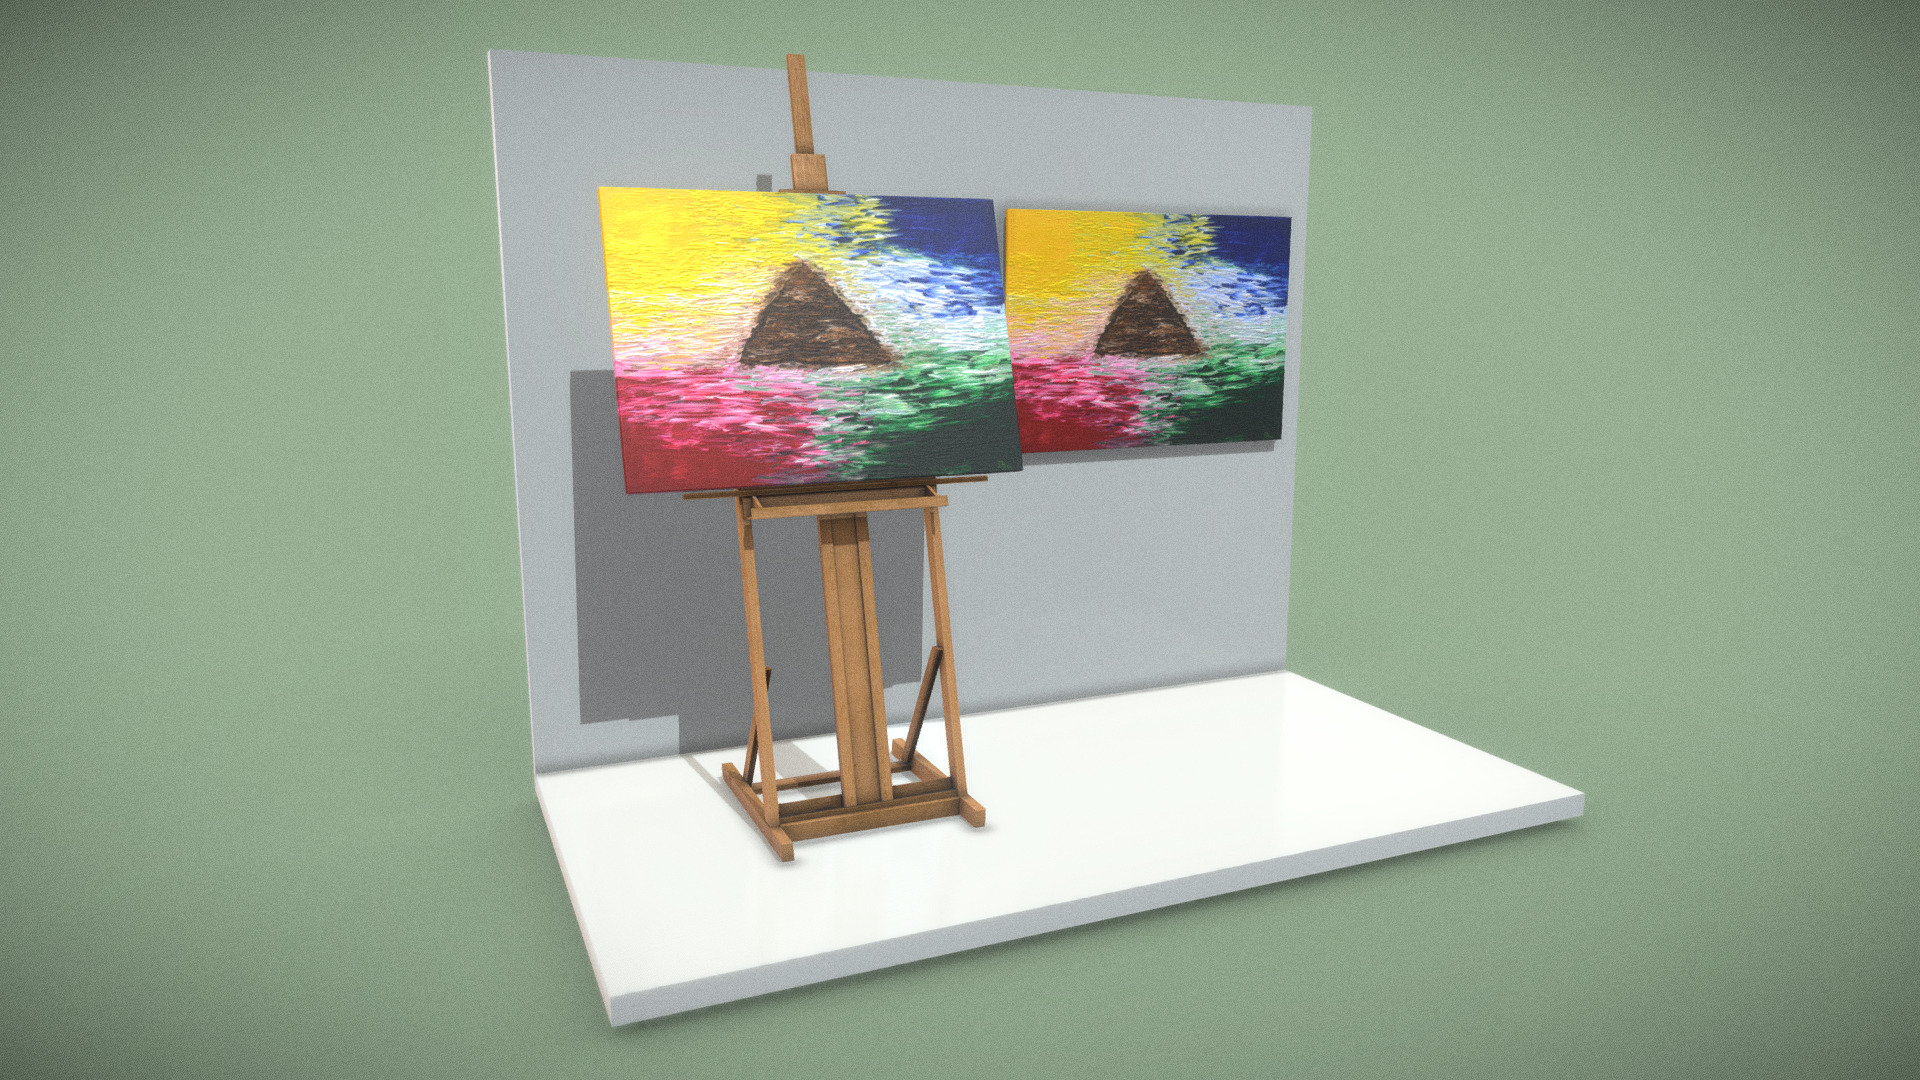 3D model Homeland – Oil Painting - This is a 3D model of the Homeland - Oil Painting. The 3D model is about a painting on a stand.